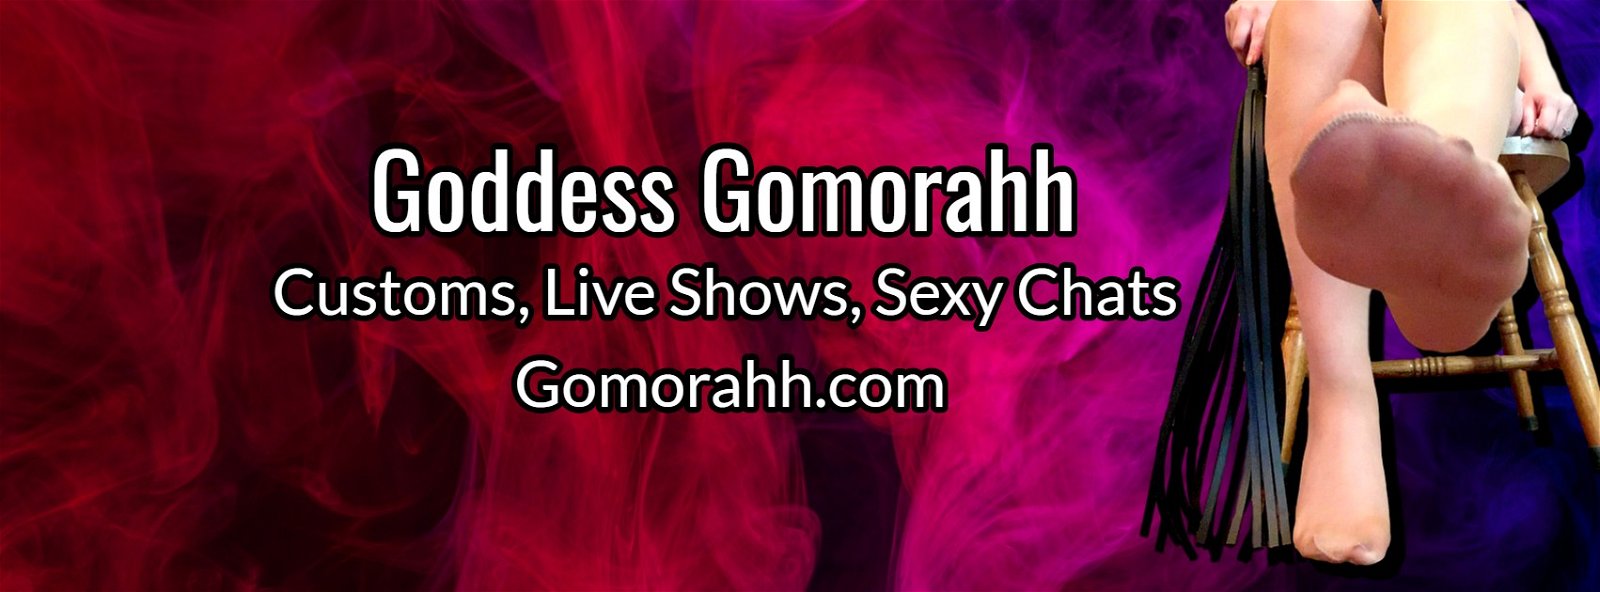 Watch the Photo by Goddess Gomorahh with the username @goddessgomorahh, who is a star user, posted on December 1, 2019